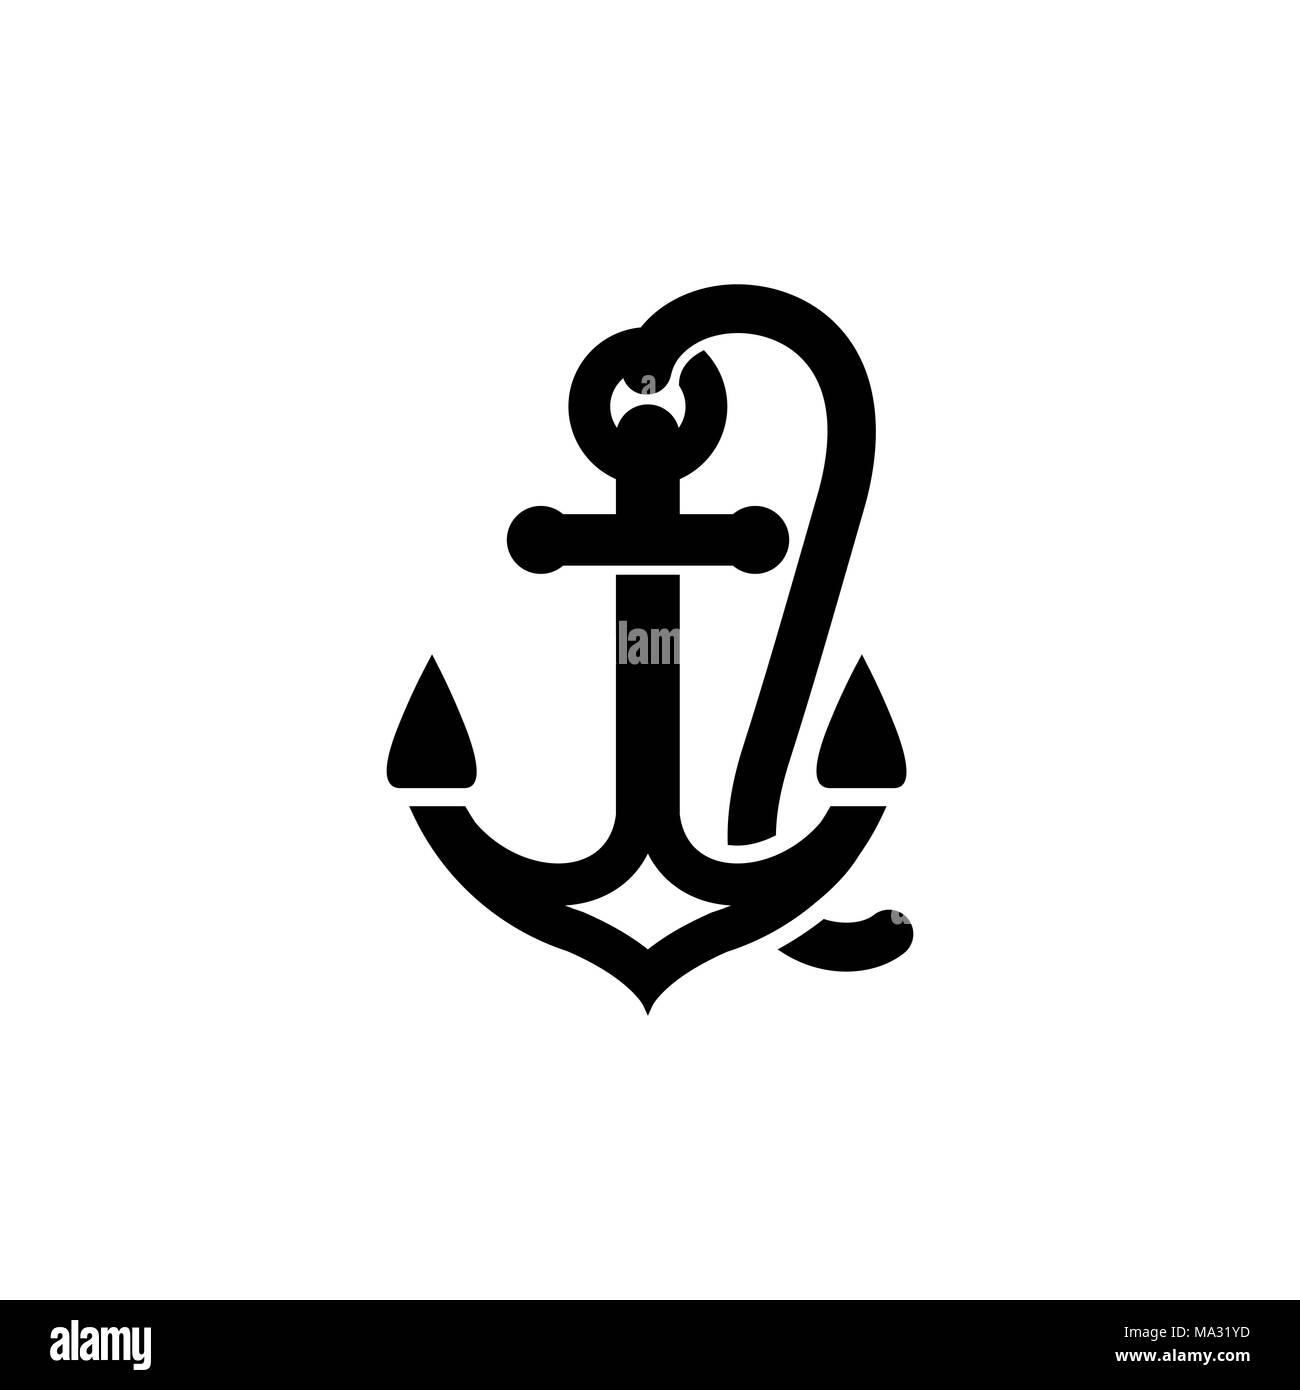 Anchor icon simple flat style illustration sign Stock Vector Image